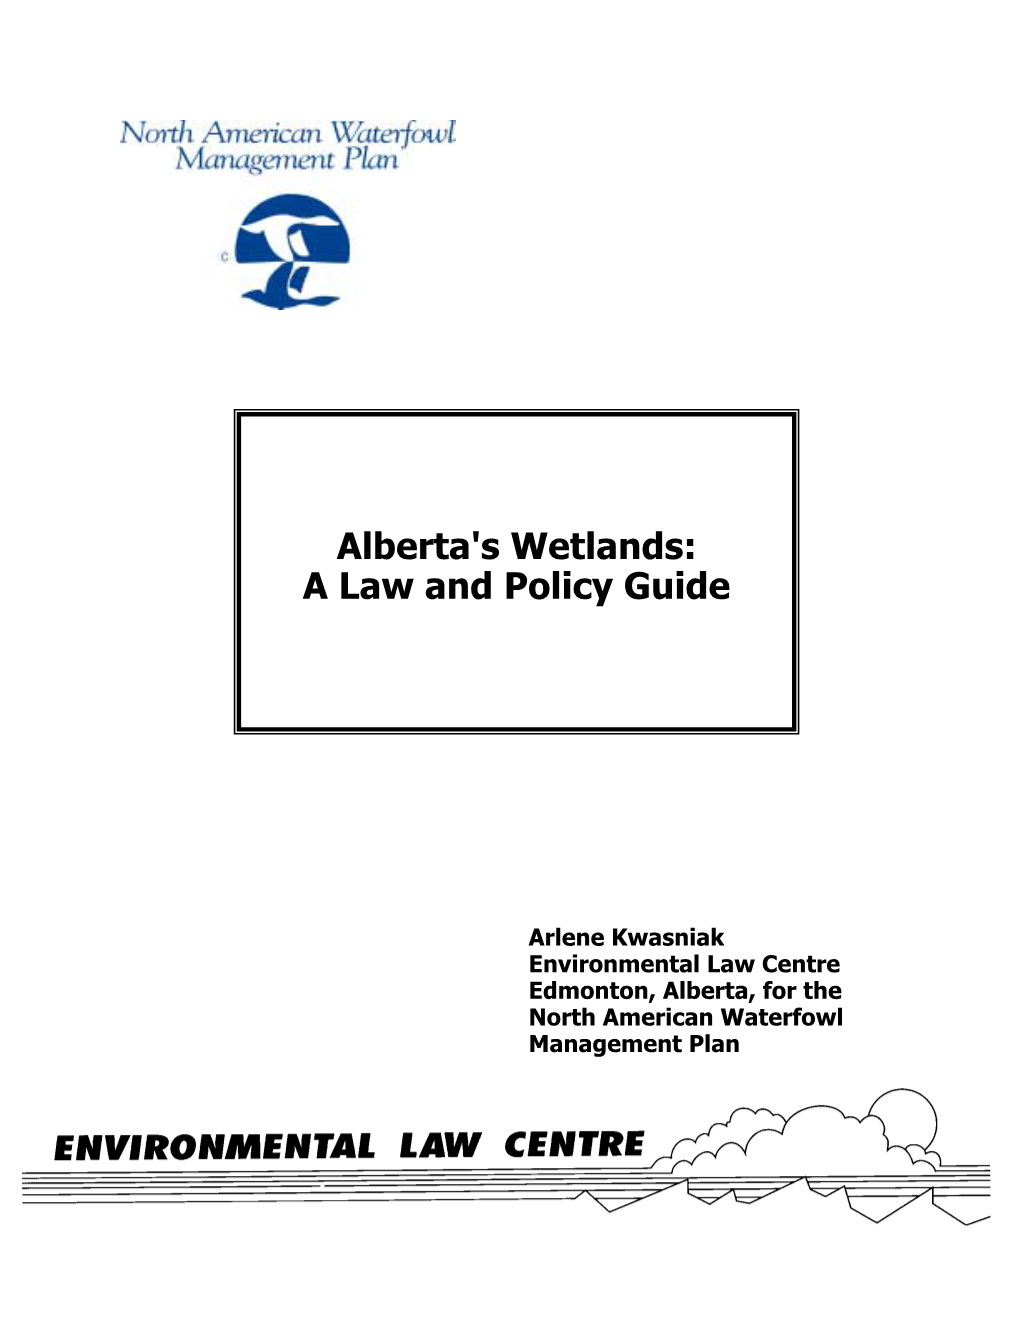 Alberta's Wetlands: a Law and Policy Guide